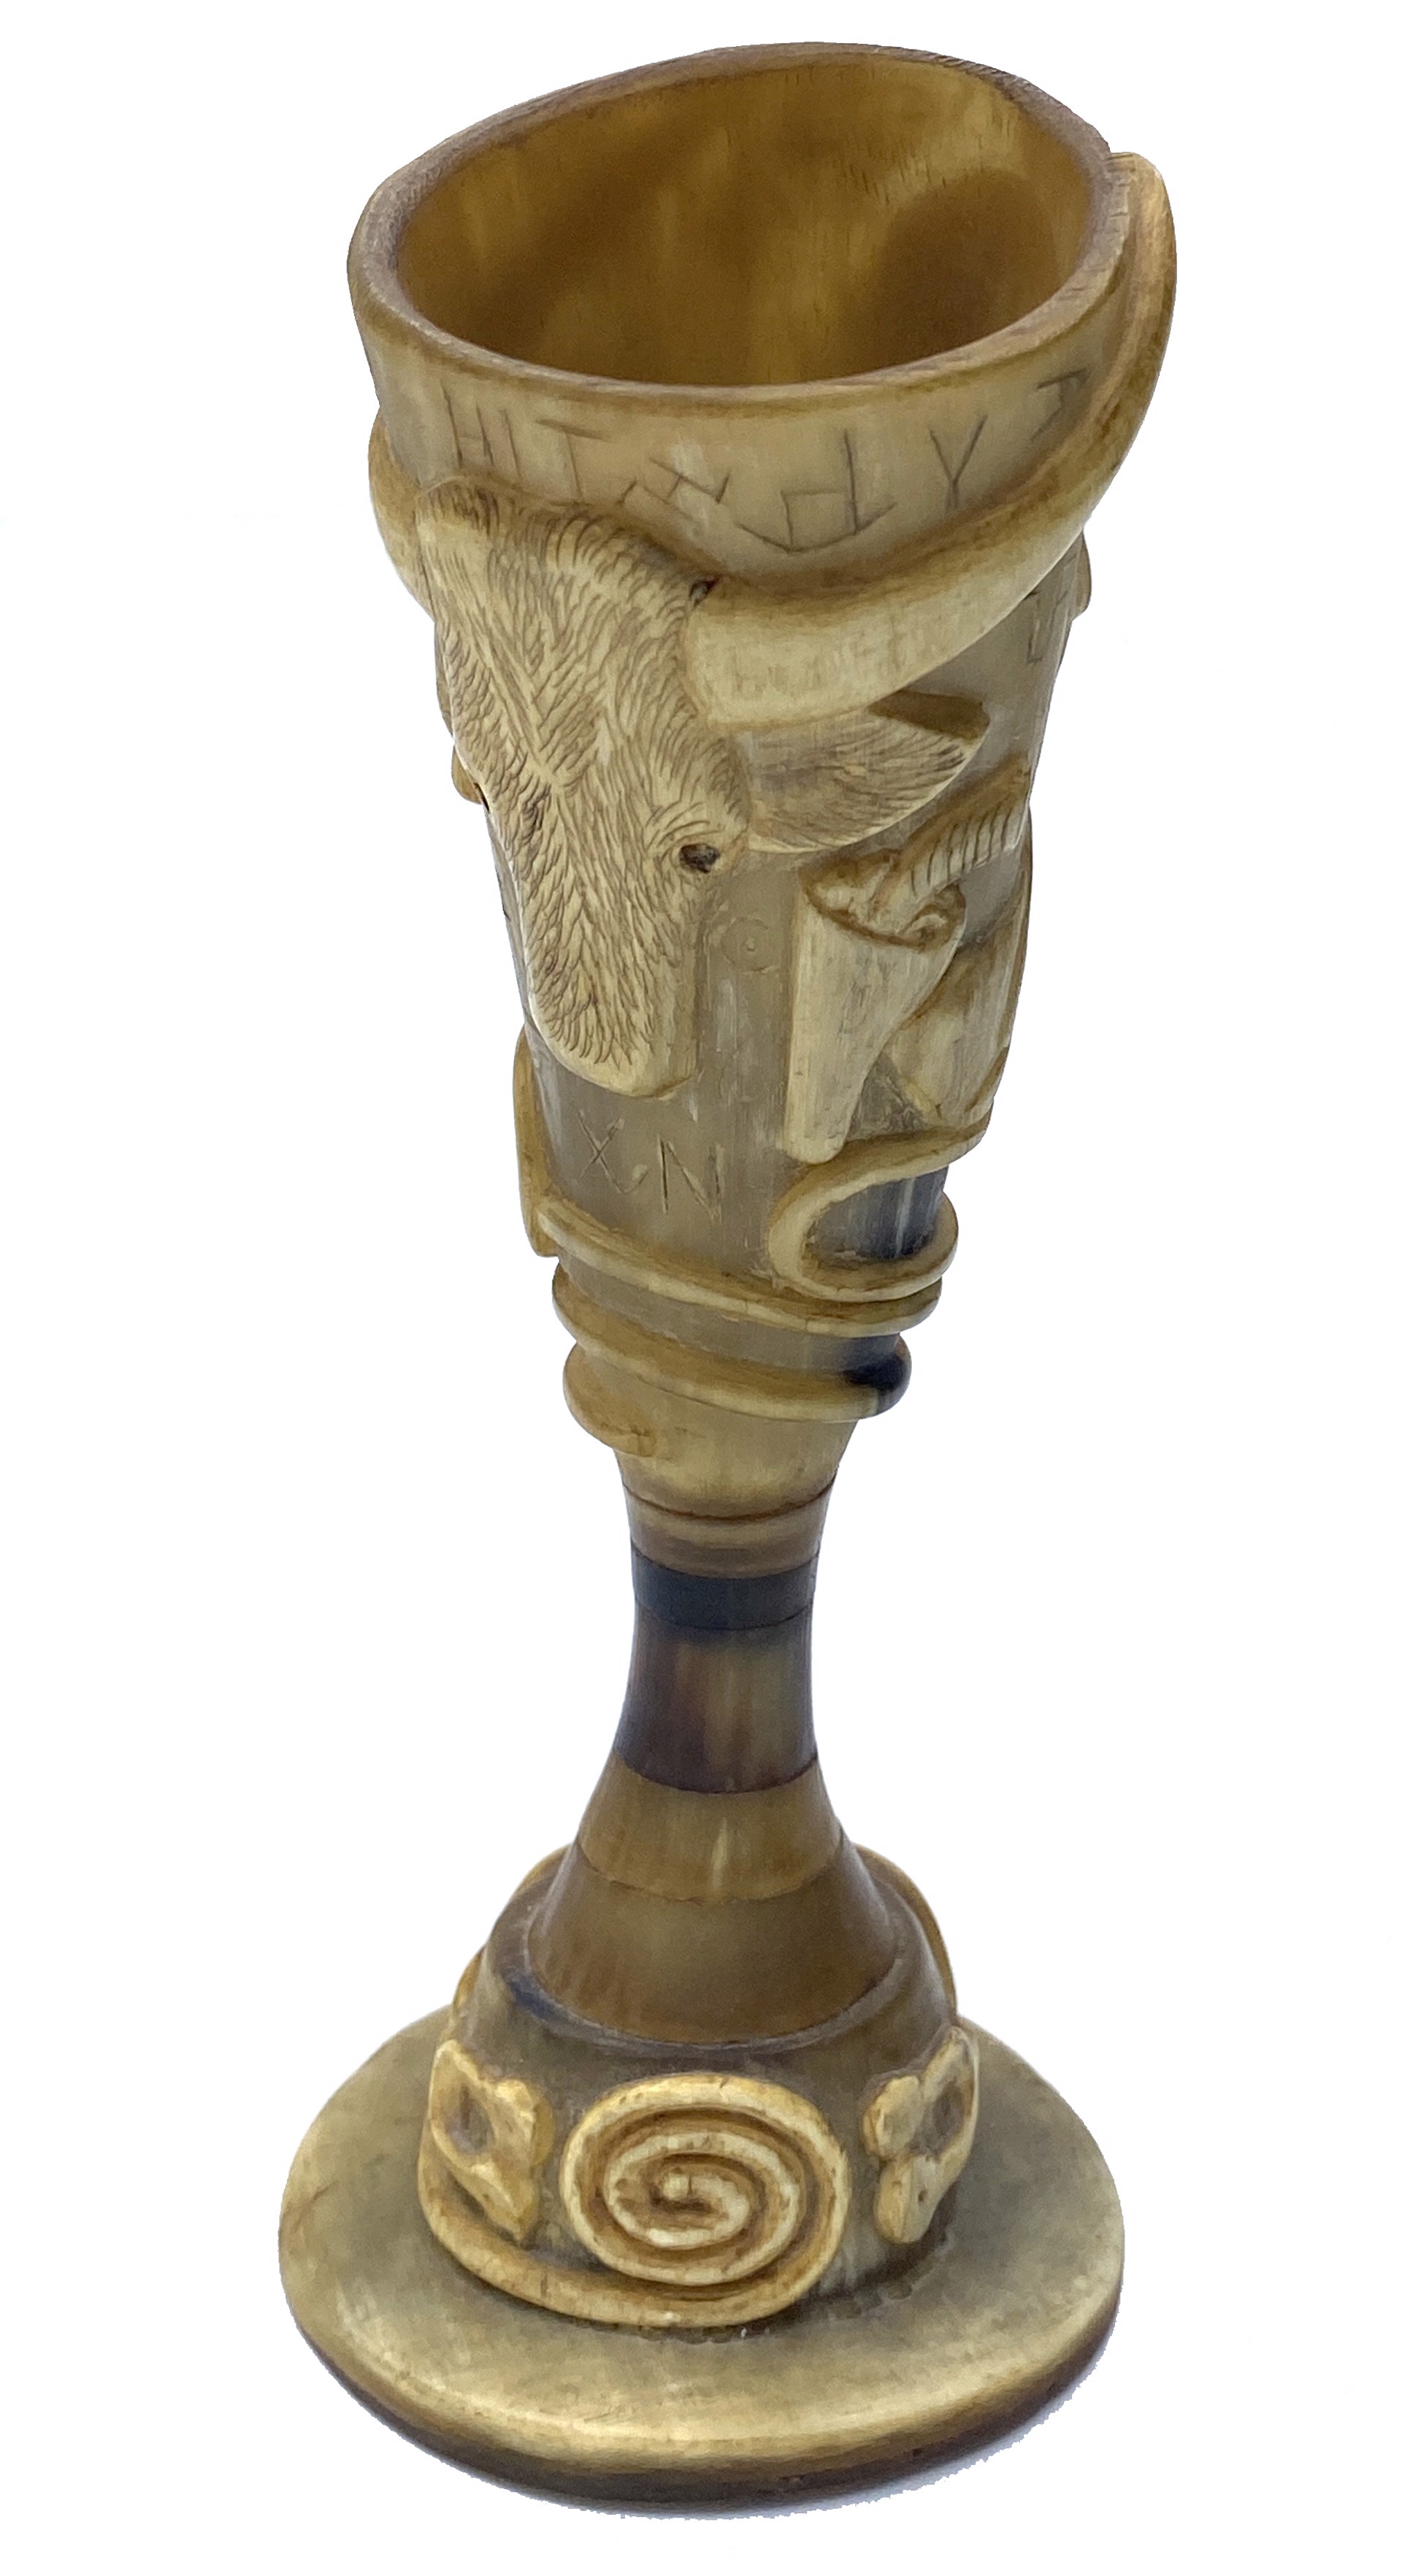 DS-80: carved horn drinking cup on stand; portrait of artist, carved ranching emblems, longhorn, saddle, riding gear, gun in holster; around base - "Texas" with image of spurs and rope; horn inlay at neck by Dan Super